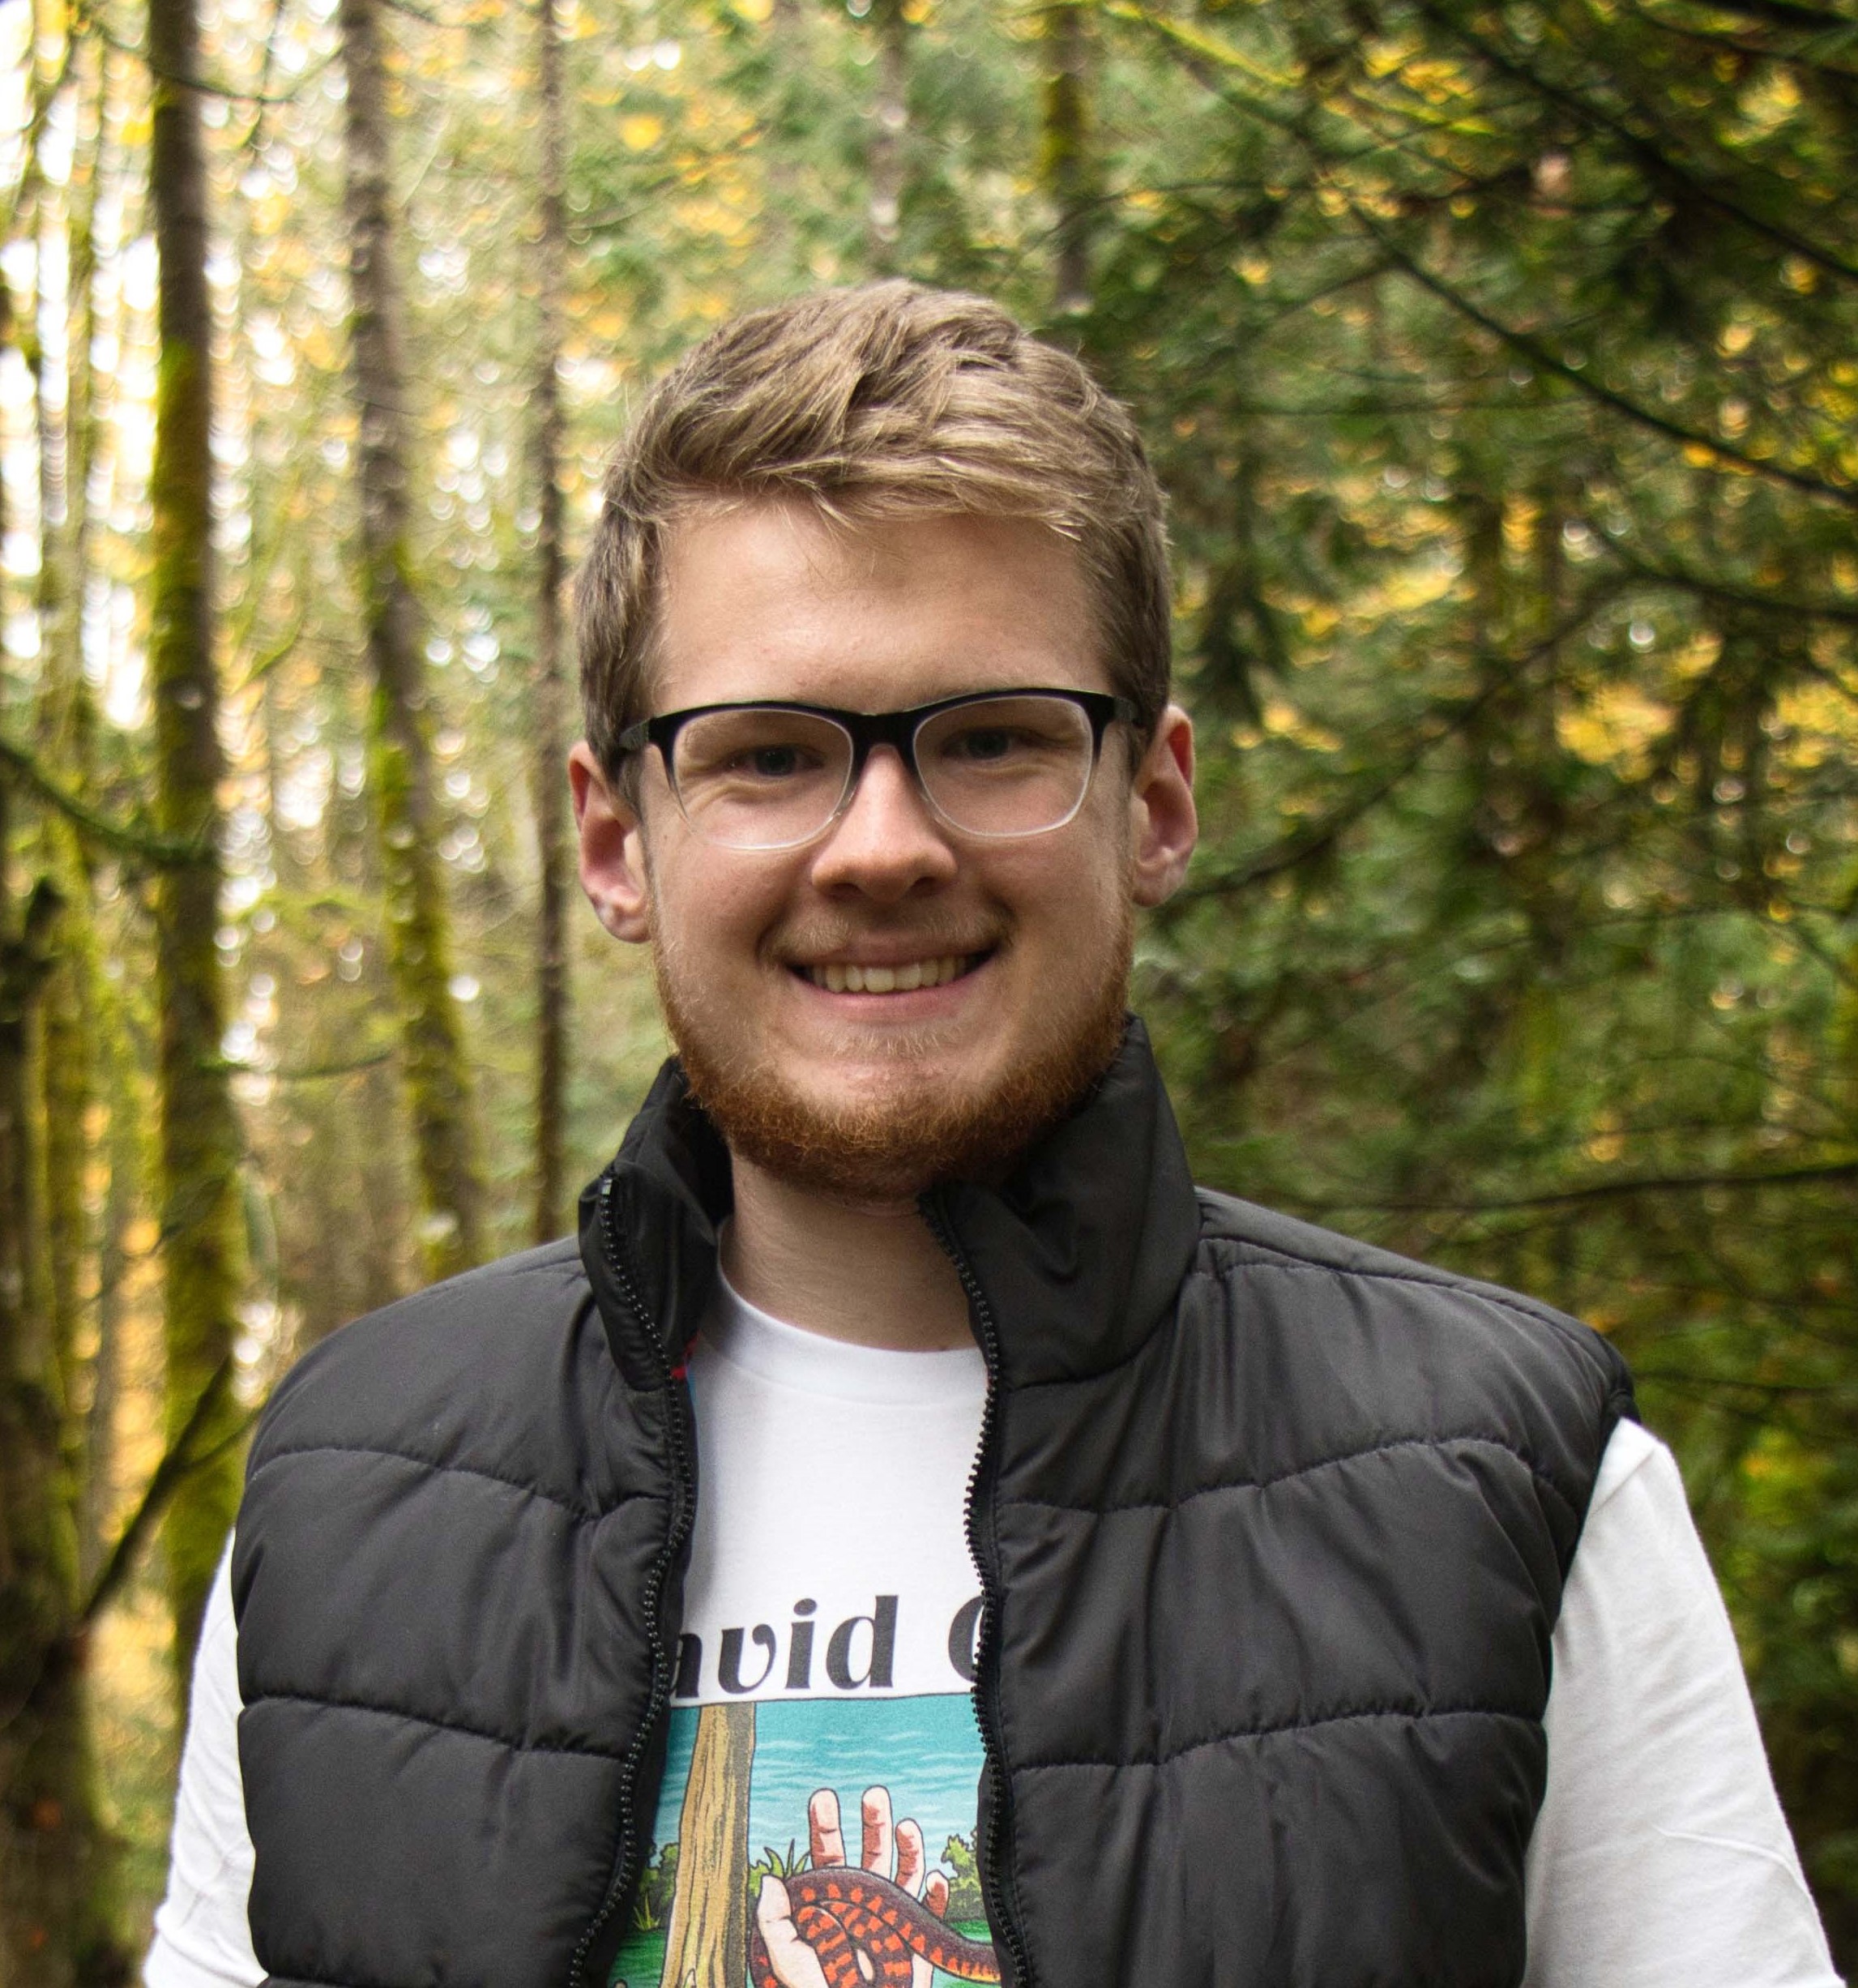 Connor stands in front of trees, with a black vest, white t-shirt and glasses.